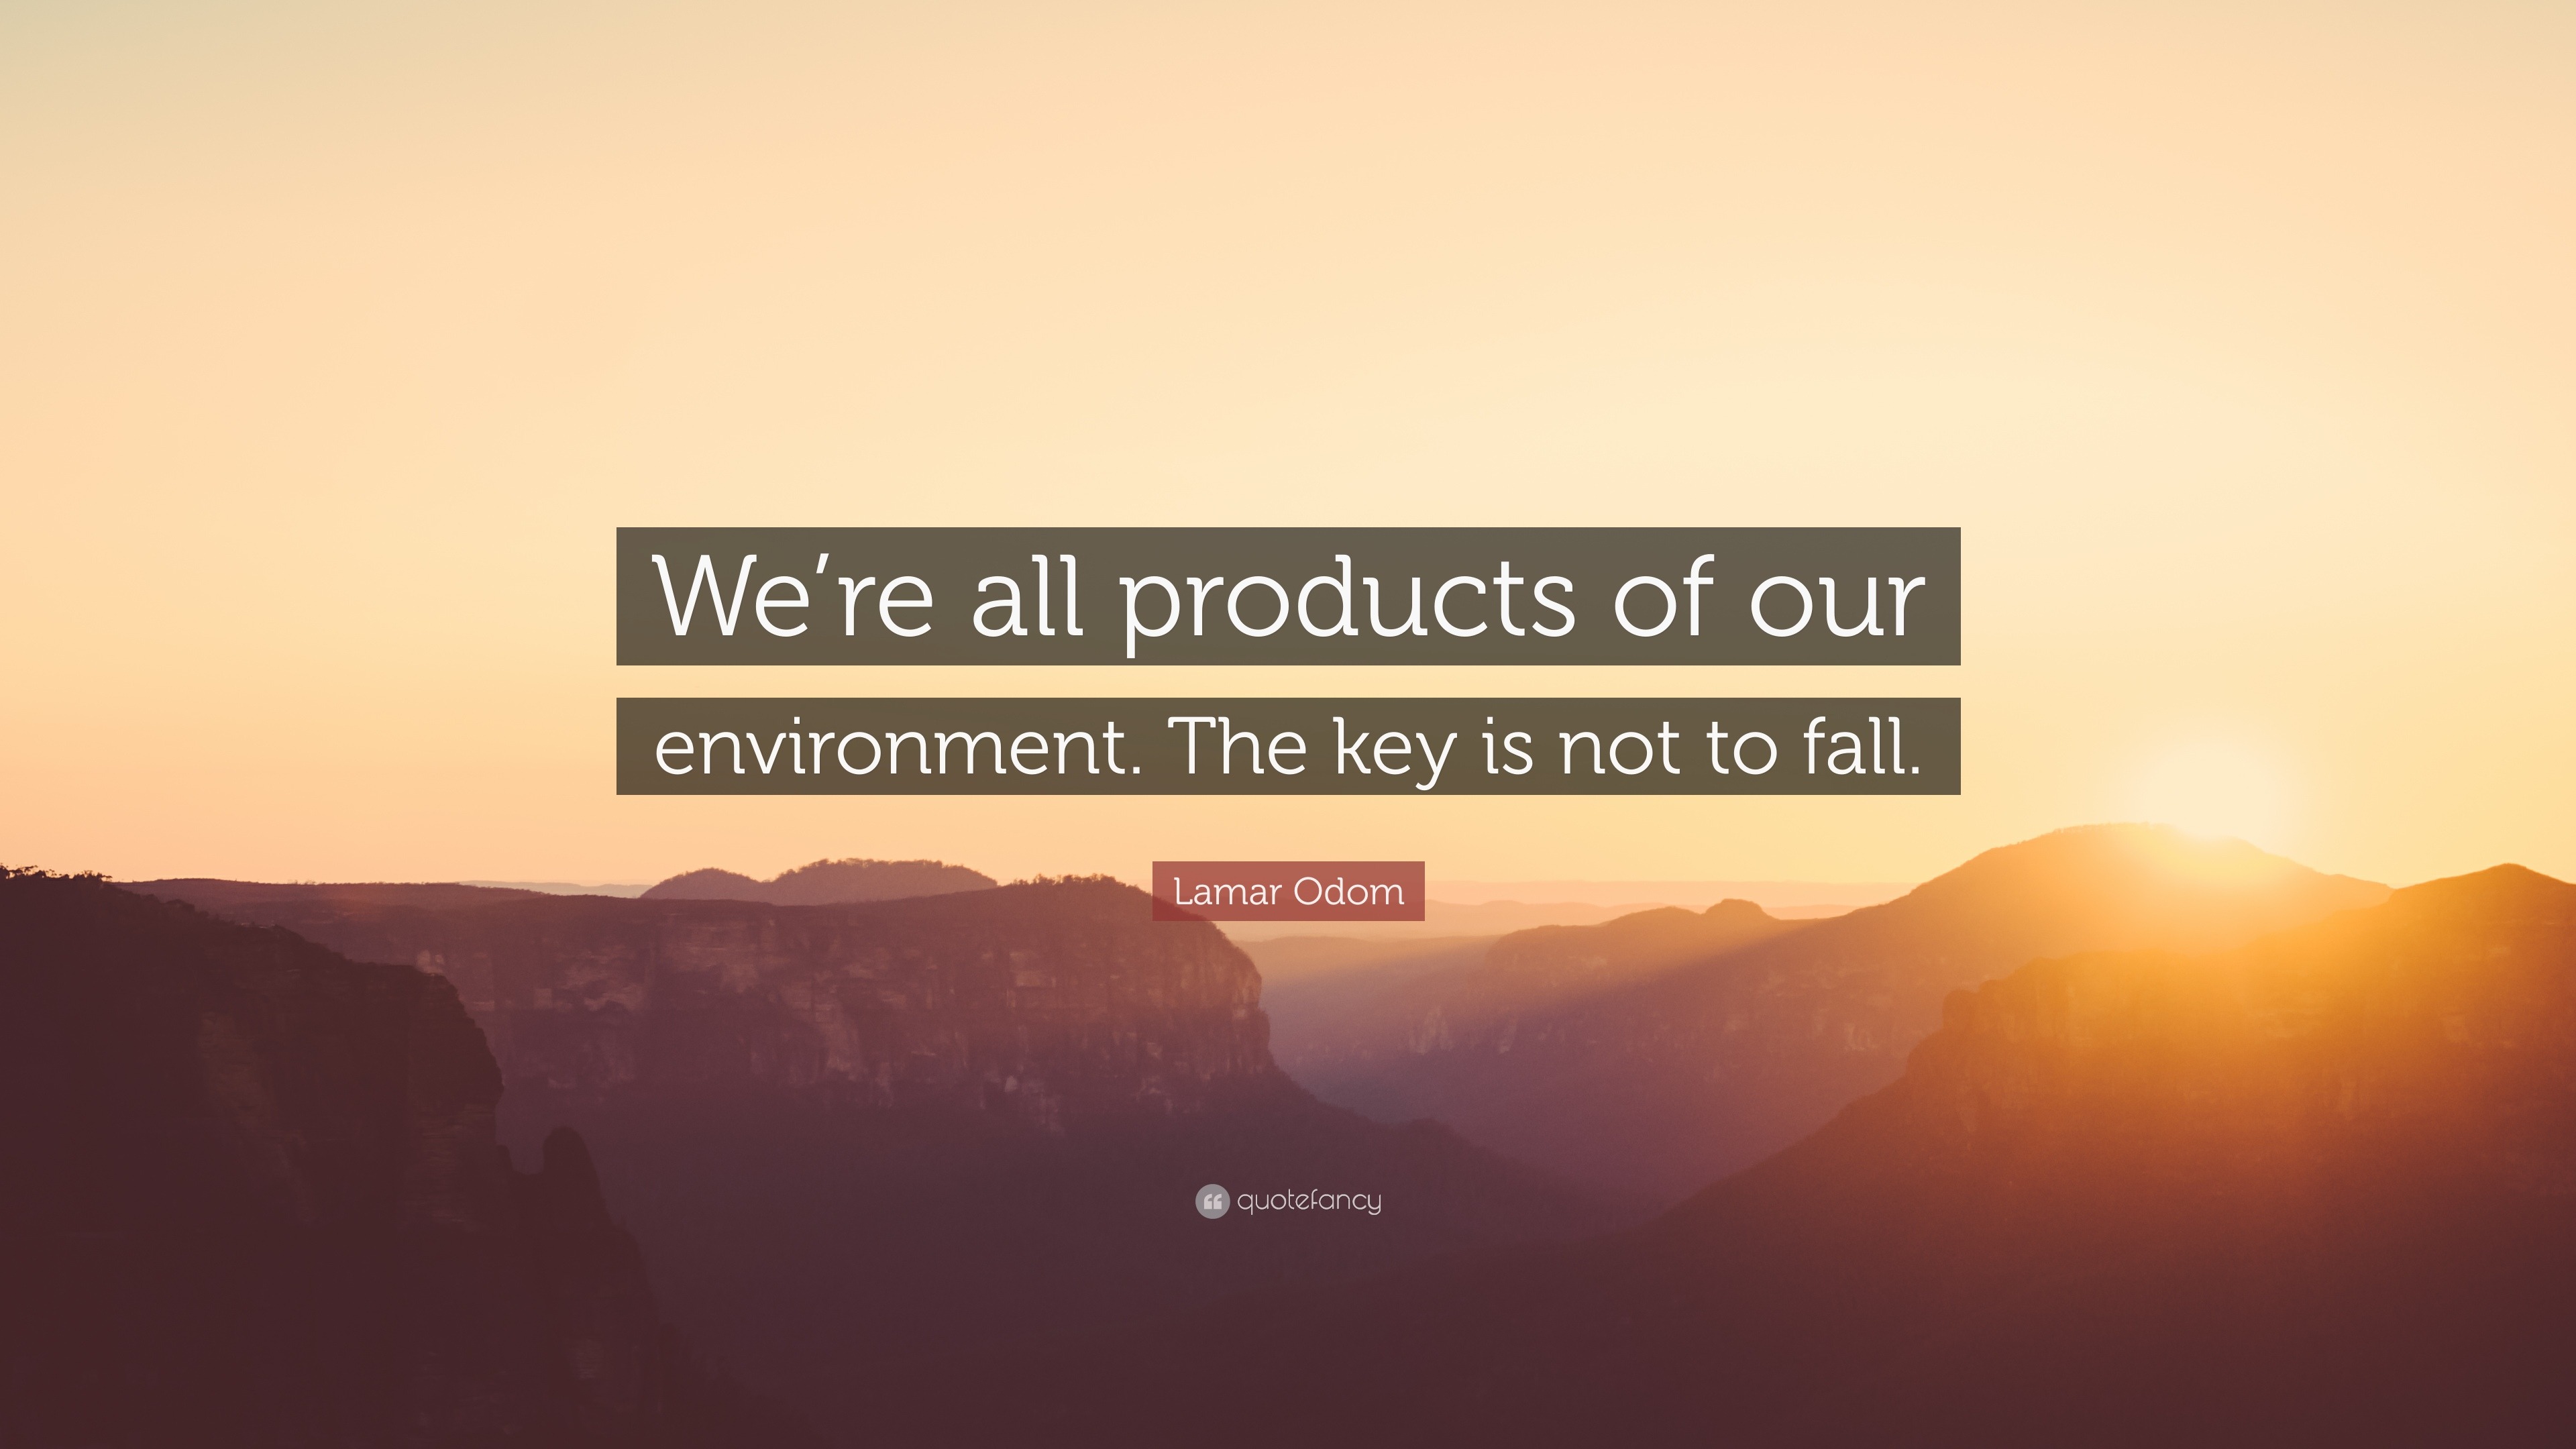 Product Of Your Environment Quote / Jack Nicholson Quote: "I don't want